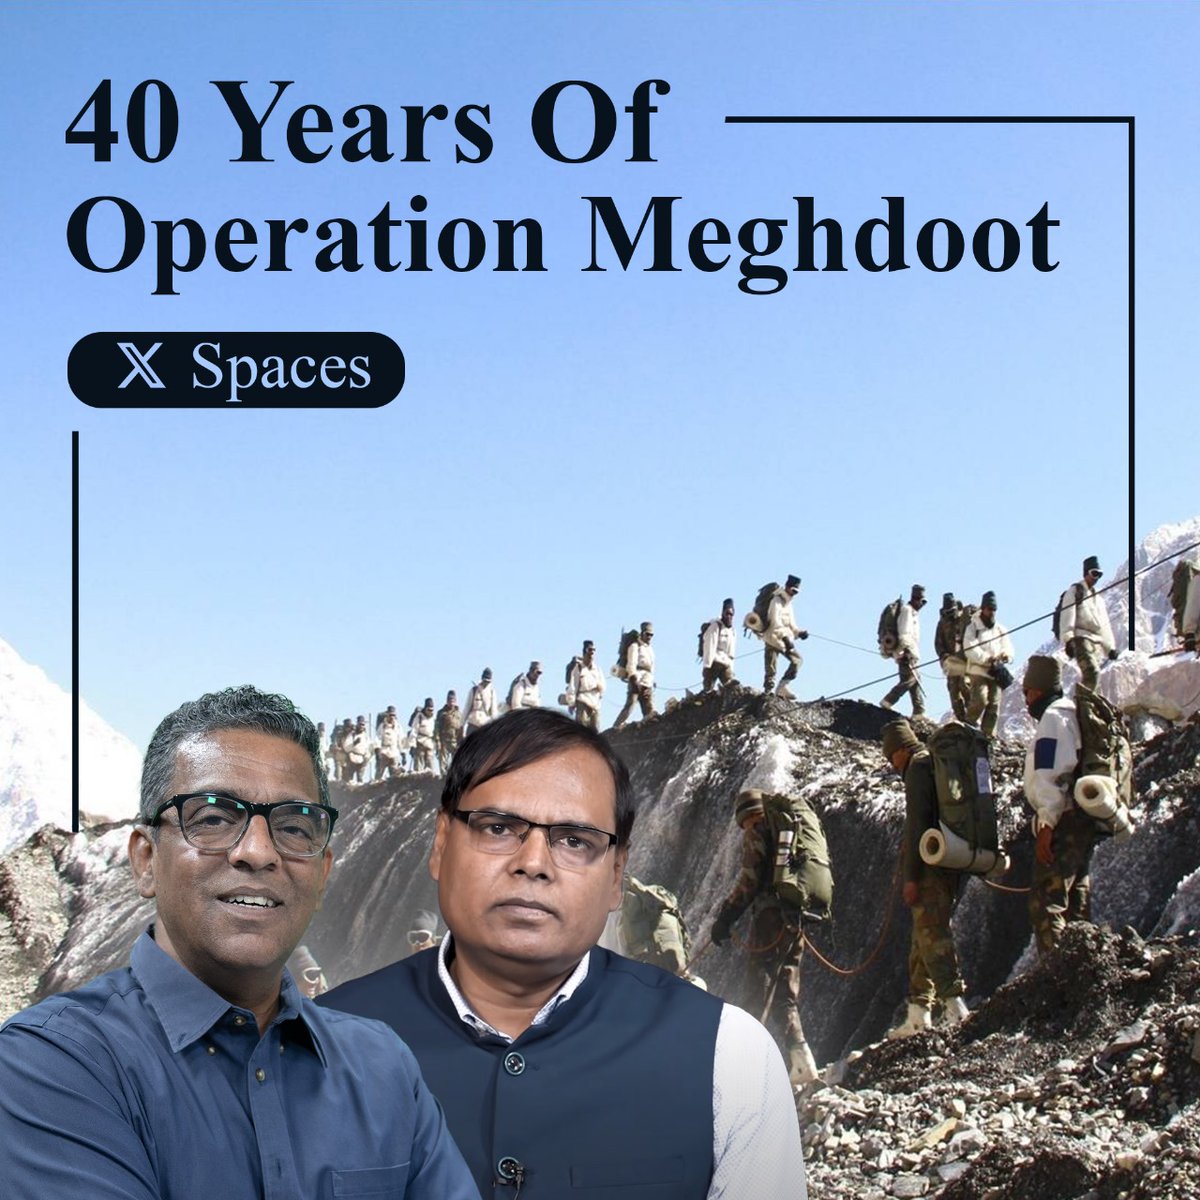 Siachen: How India Outraced Pakistan Catch @RRaviishankarr speak with @nitingokhale about 'The Siachen Saga' on Spaces🎙️ Tune in on April 12 at 7 PM IST 🔗 tinyurl.com/ya2asd5m #siachen #operationmeghdoot #indianarmy #india #pakistan